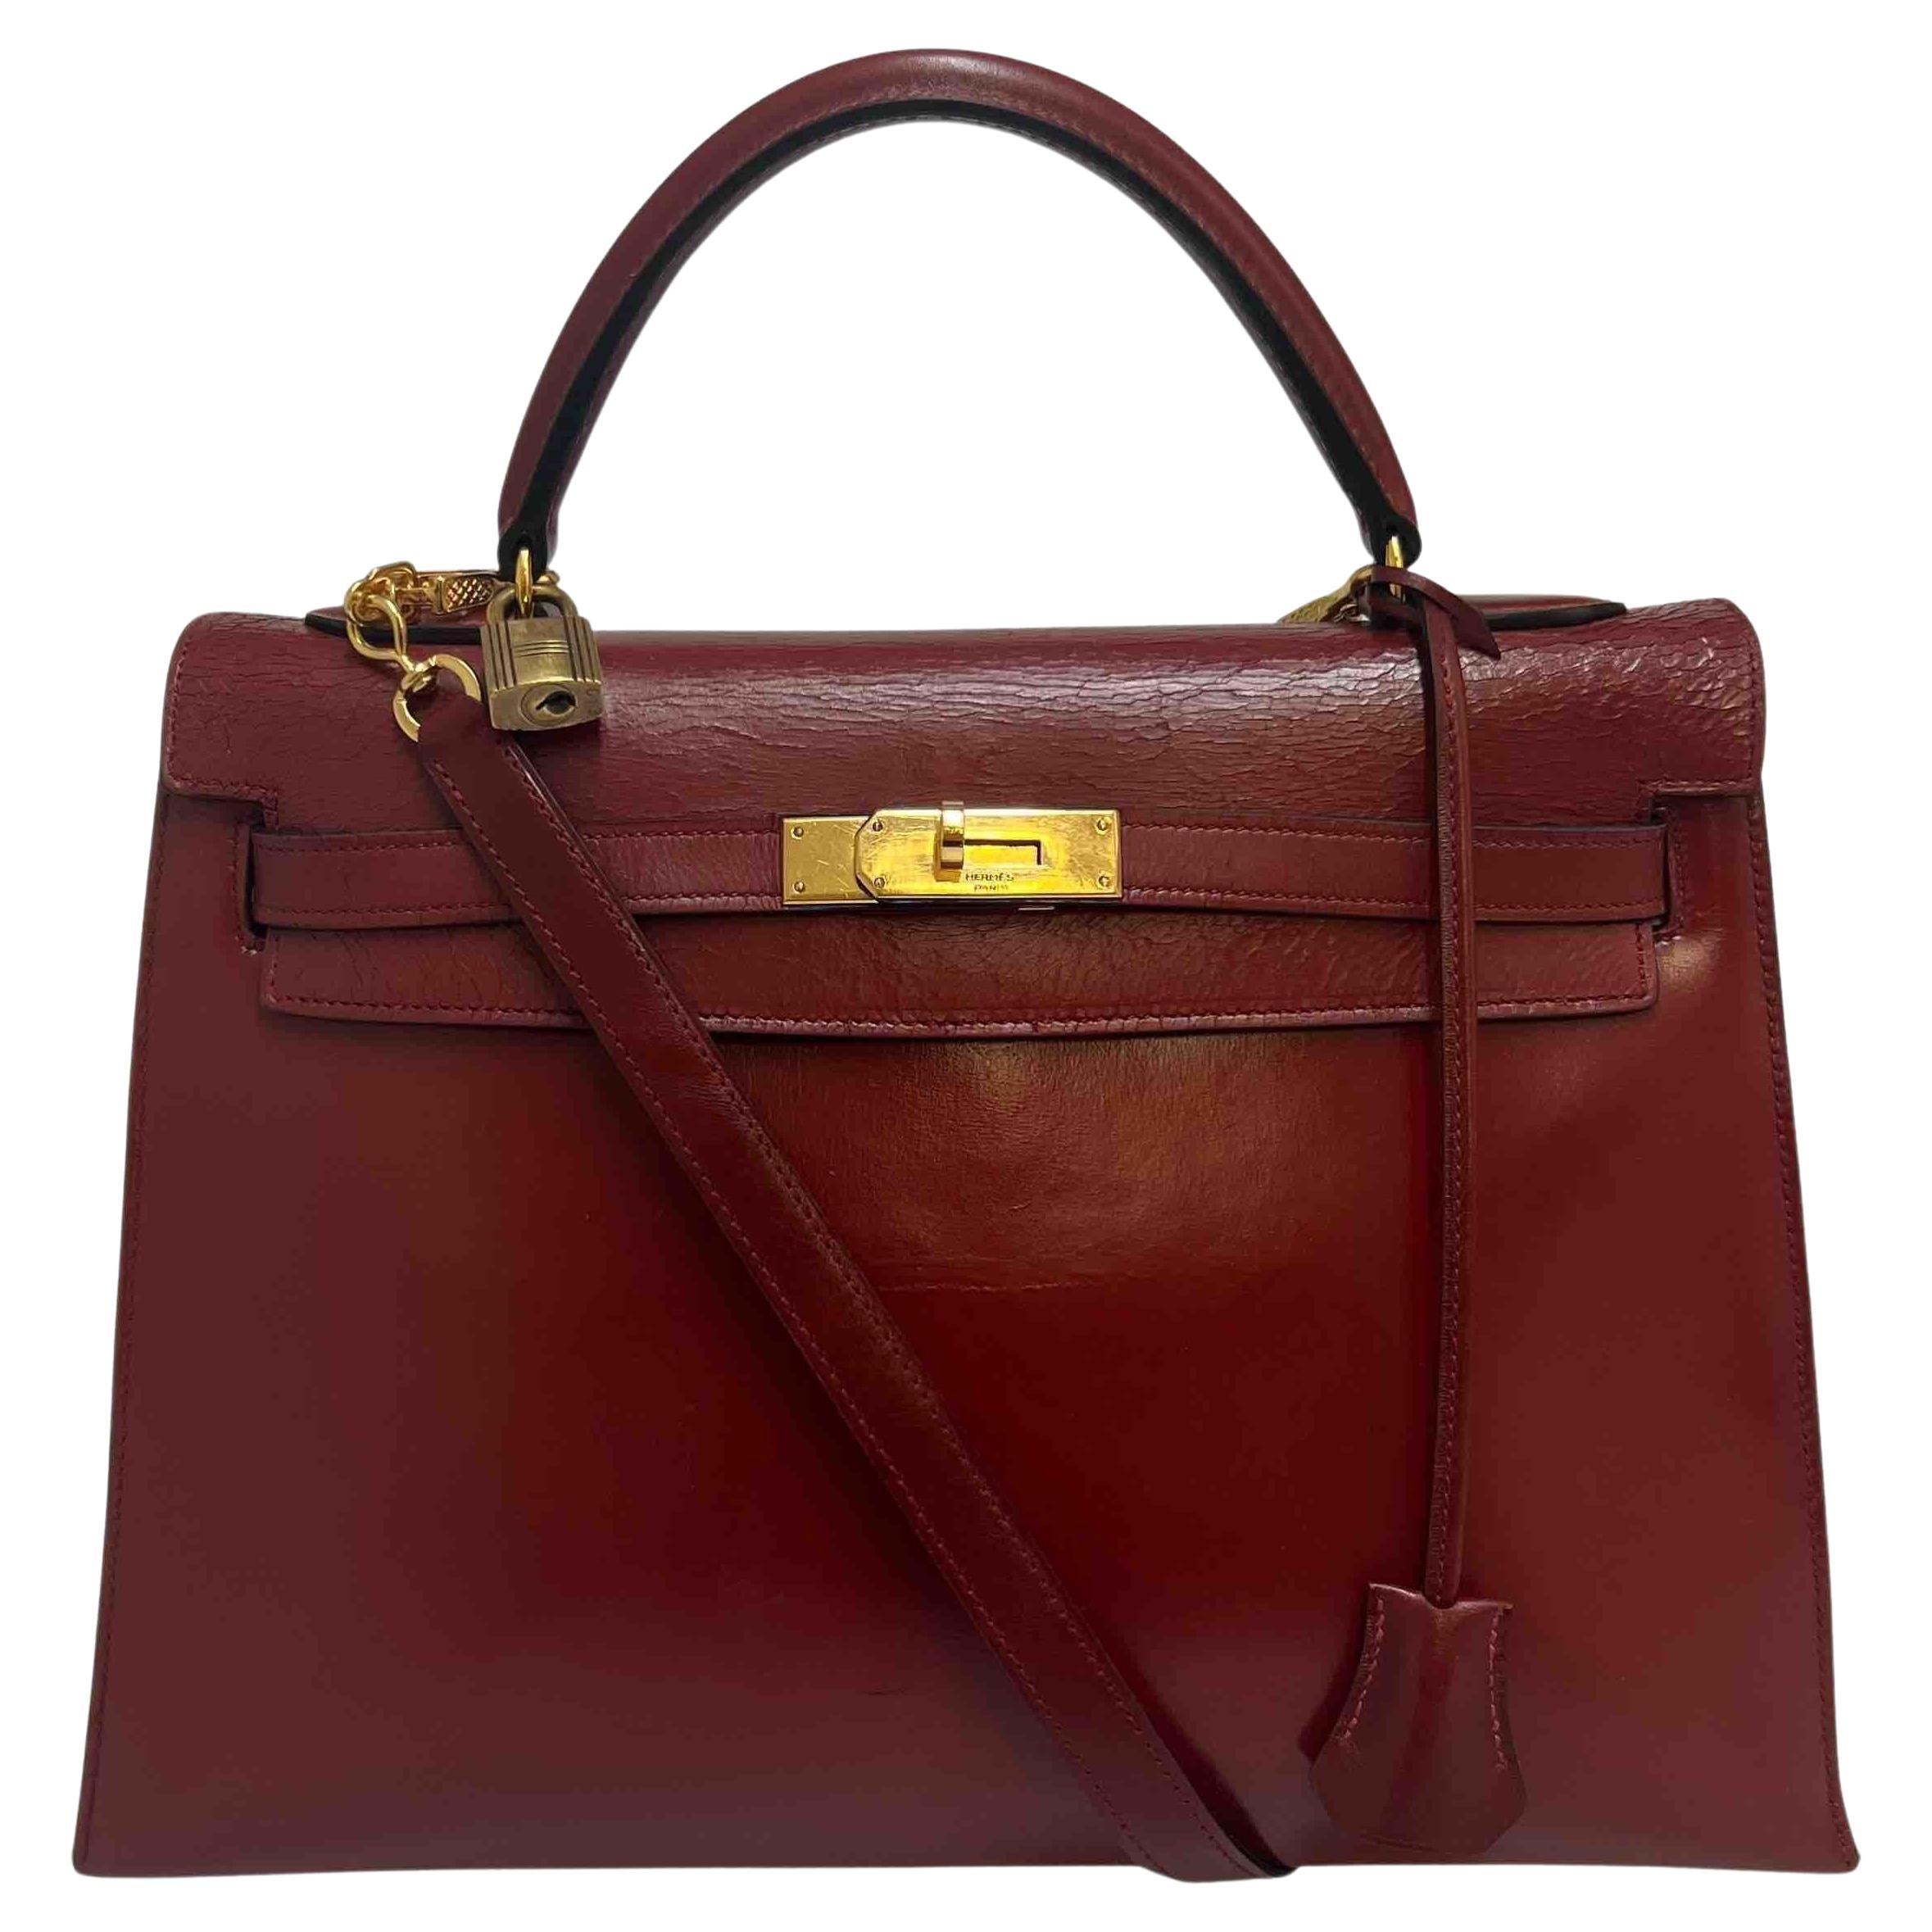 Vintage HERMES Kelly 32 sellier in Red H box leather